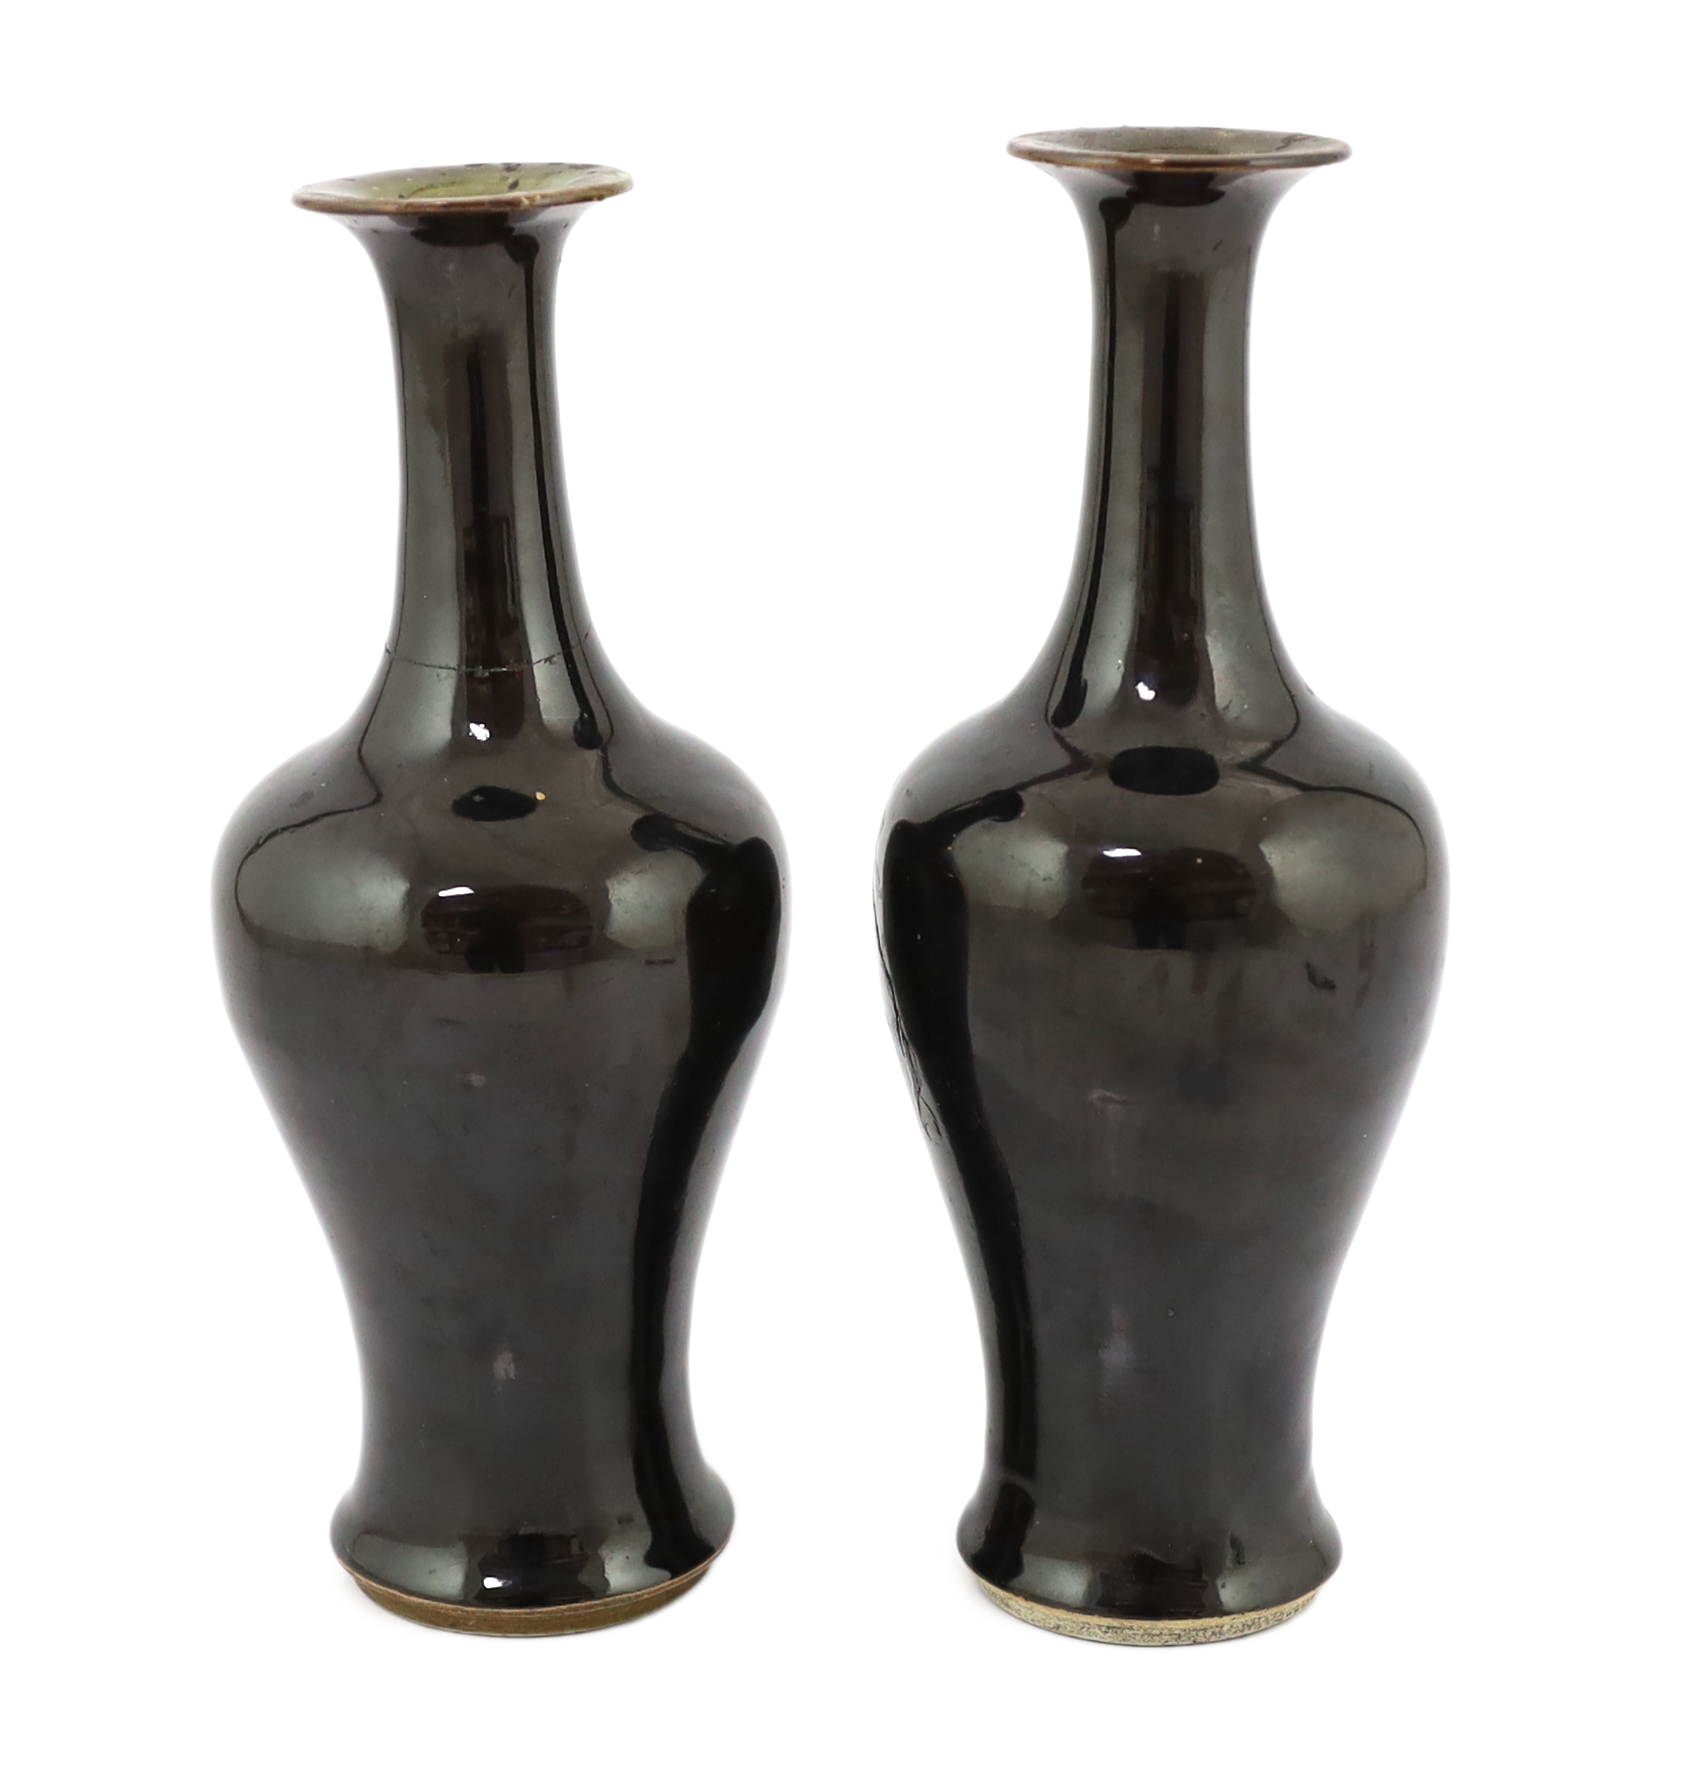 A near pair of Chinese mirror-black glazed vases, Kangxi period, both broken and glued